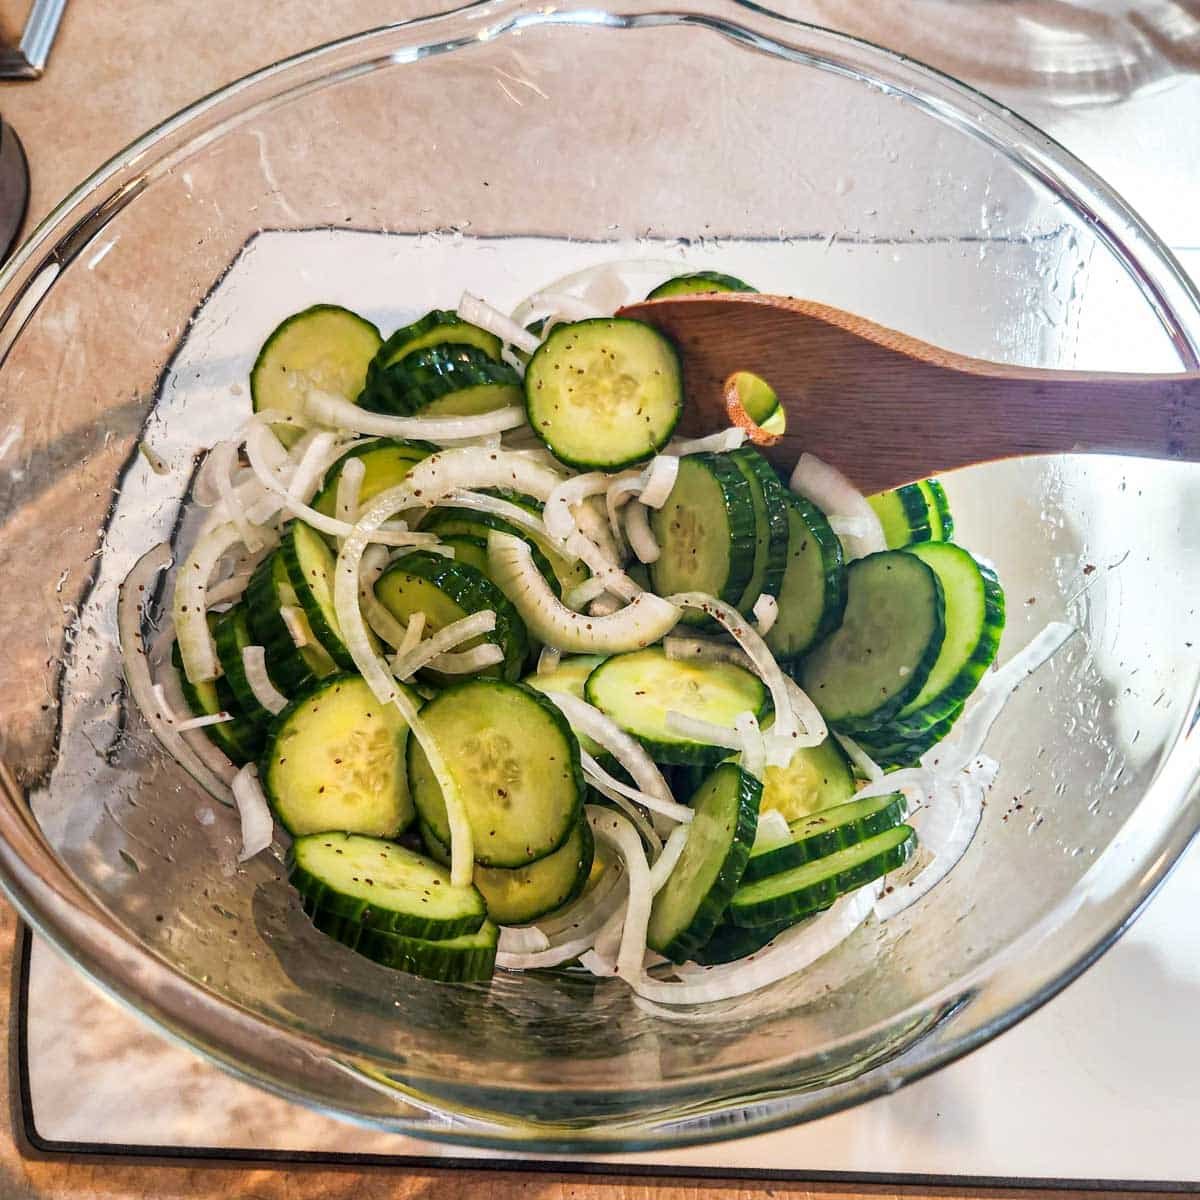 sliced cucumbers and sliced onions in a bowl coated in a vinegar and celery seed mixture